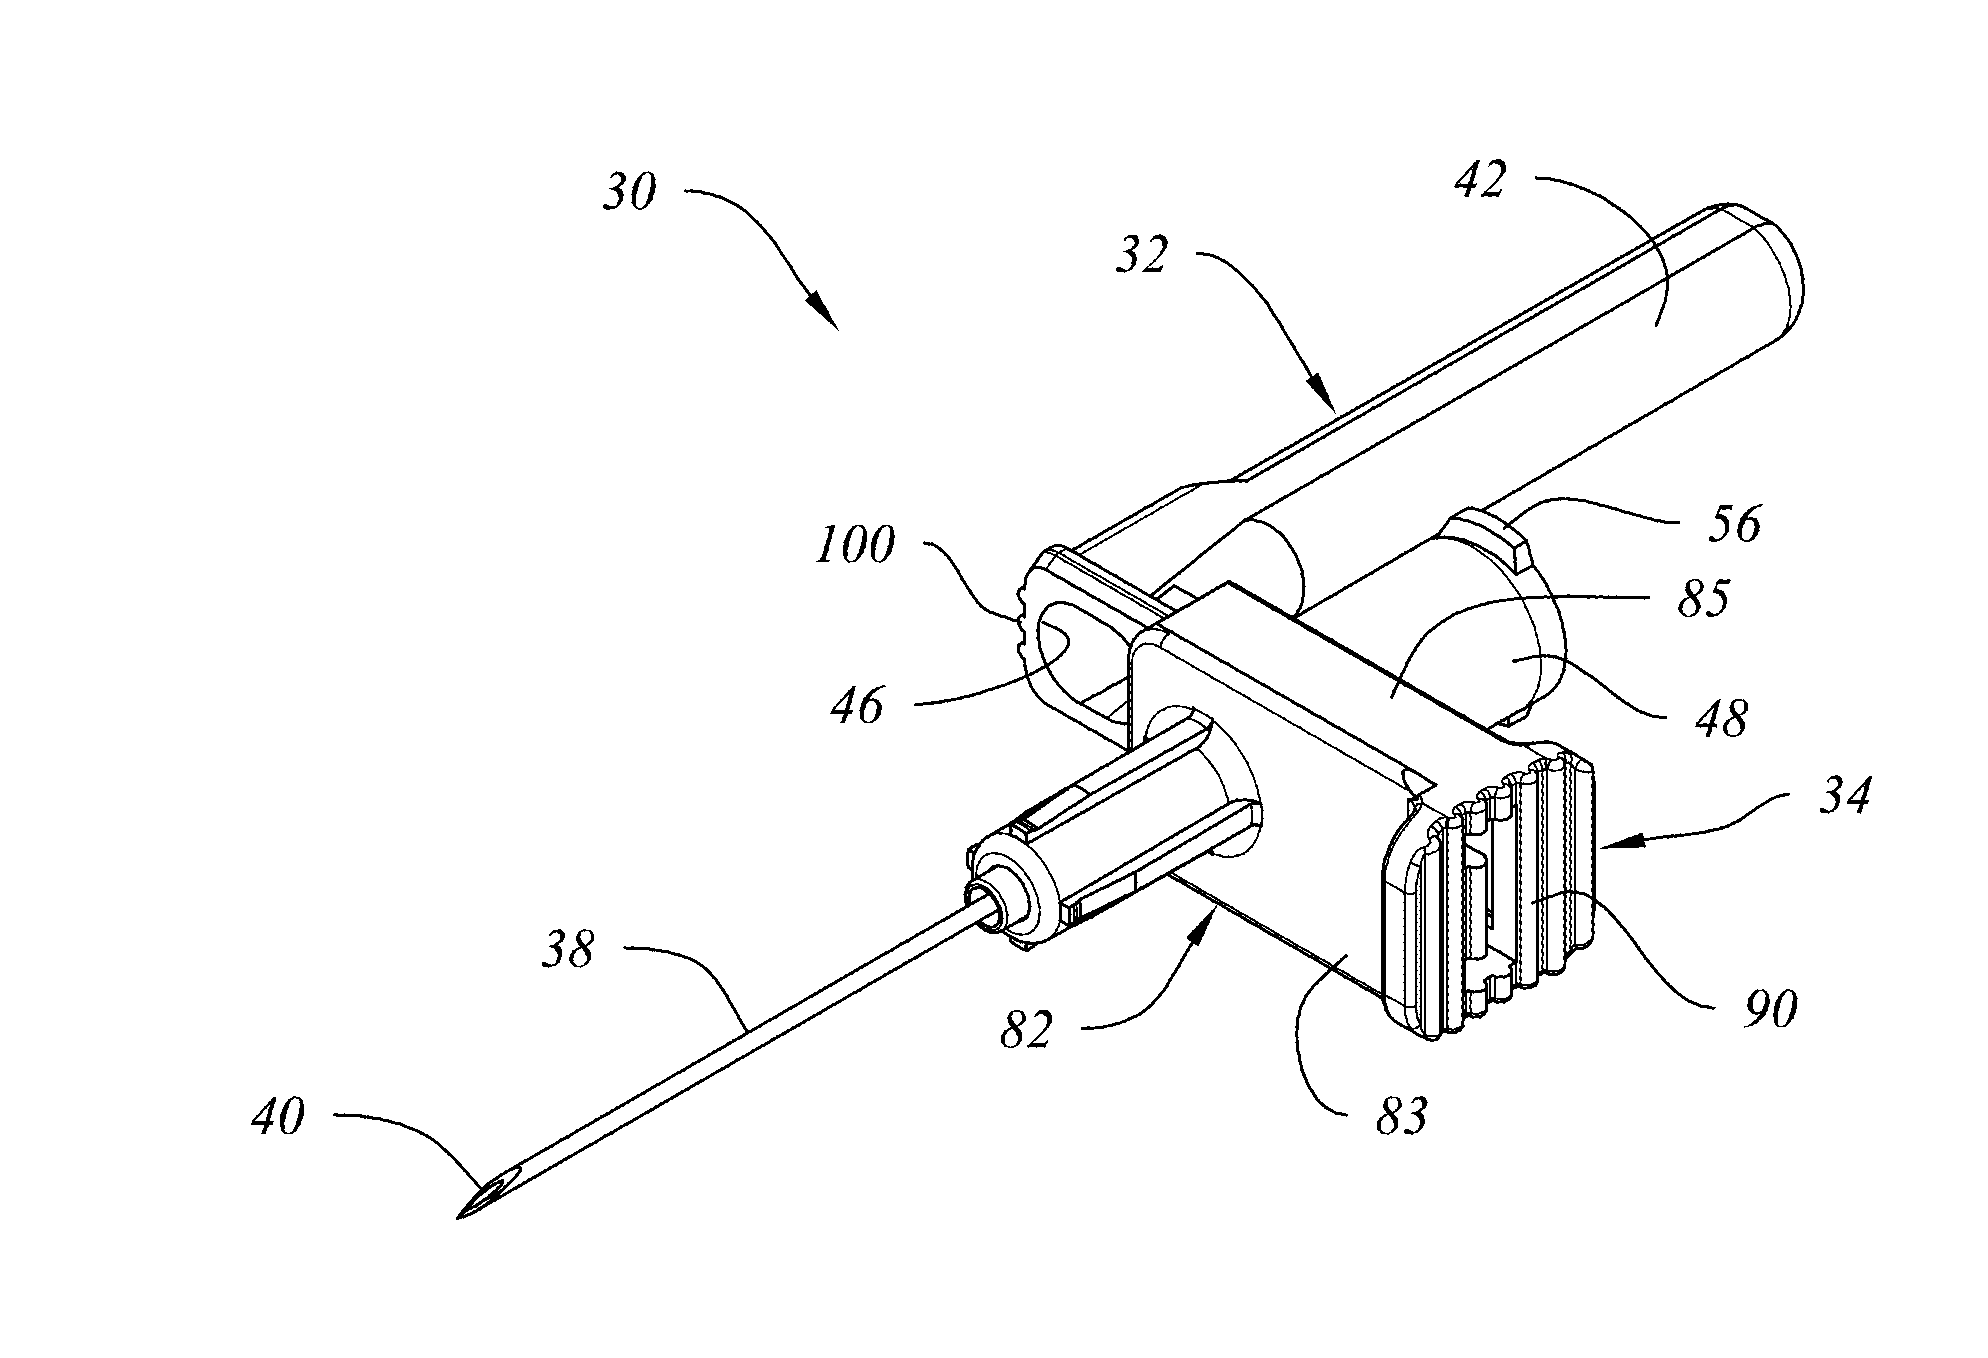 Retractable Needle for Blood Gas Sampling